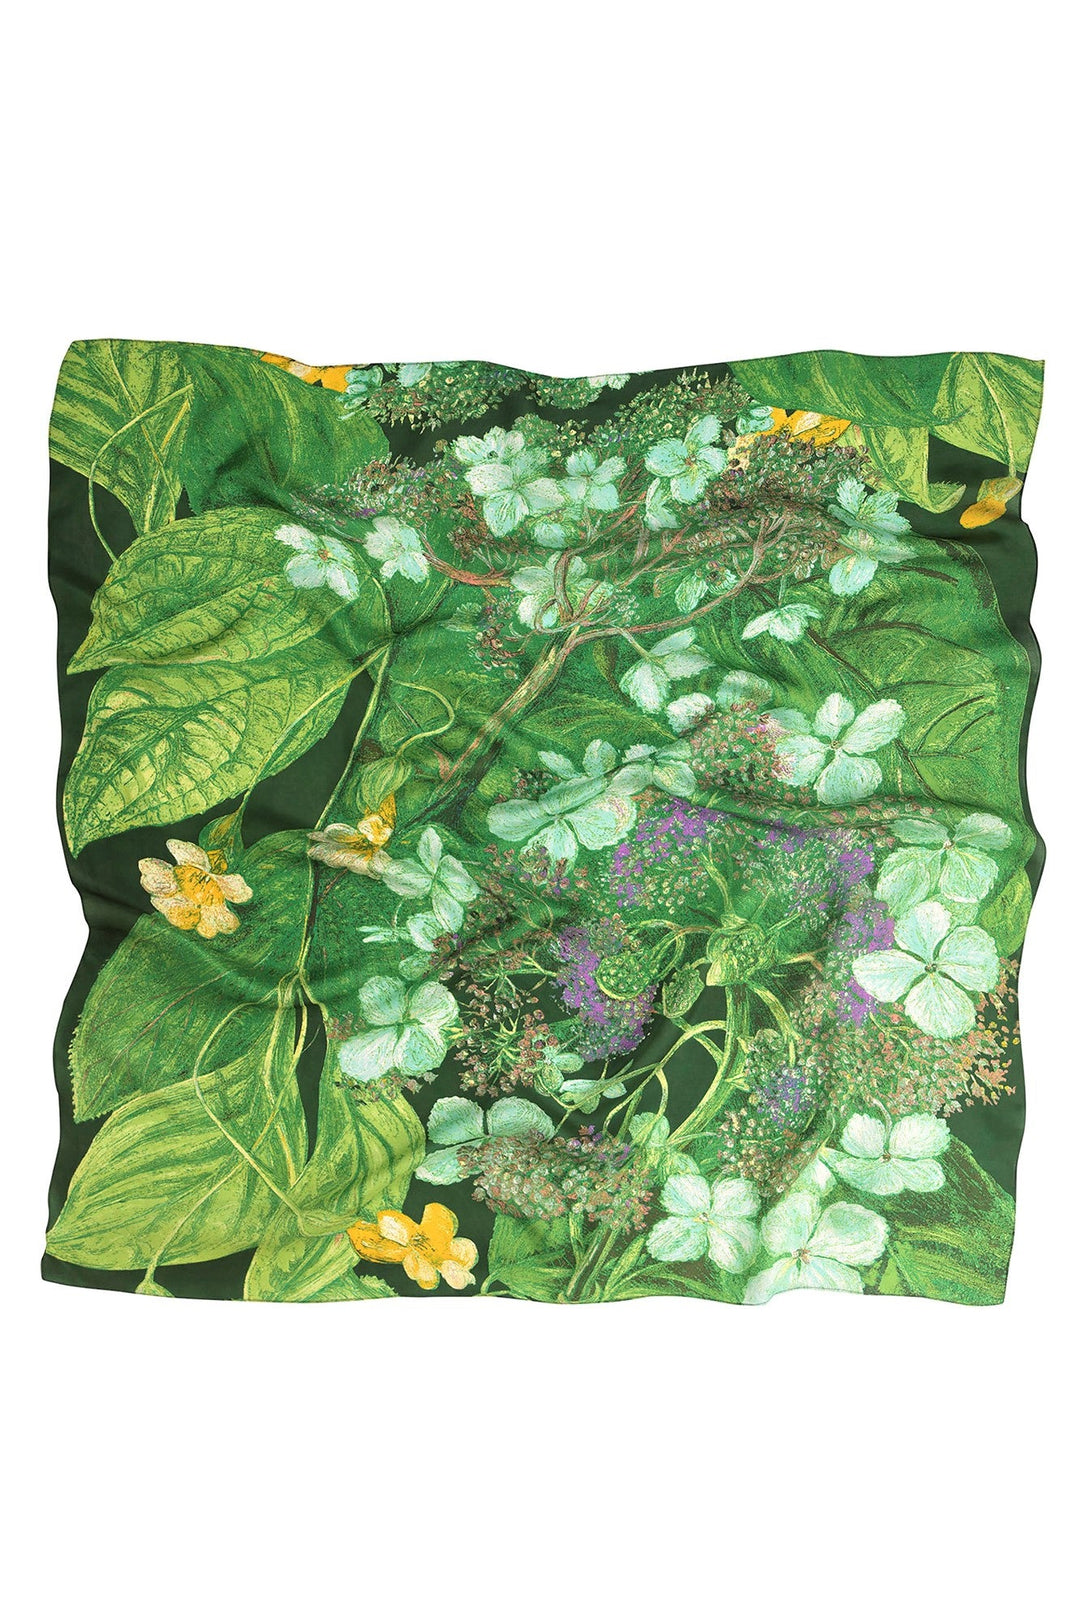 Marianne North Hydrangea Lime Silk Scarf- 100% silk, 100% hand screen printed and a whole 100cm x 100cm of print, this silk scarf oozes luxury whether you wear it knotted around your neck, as a headscarf or fastened around the handle of your favourite handbag.